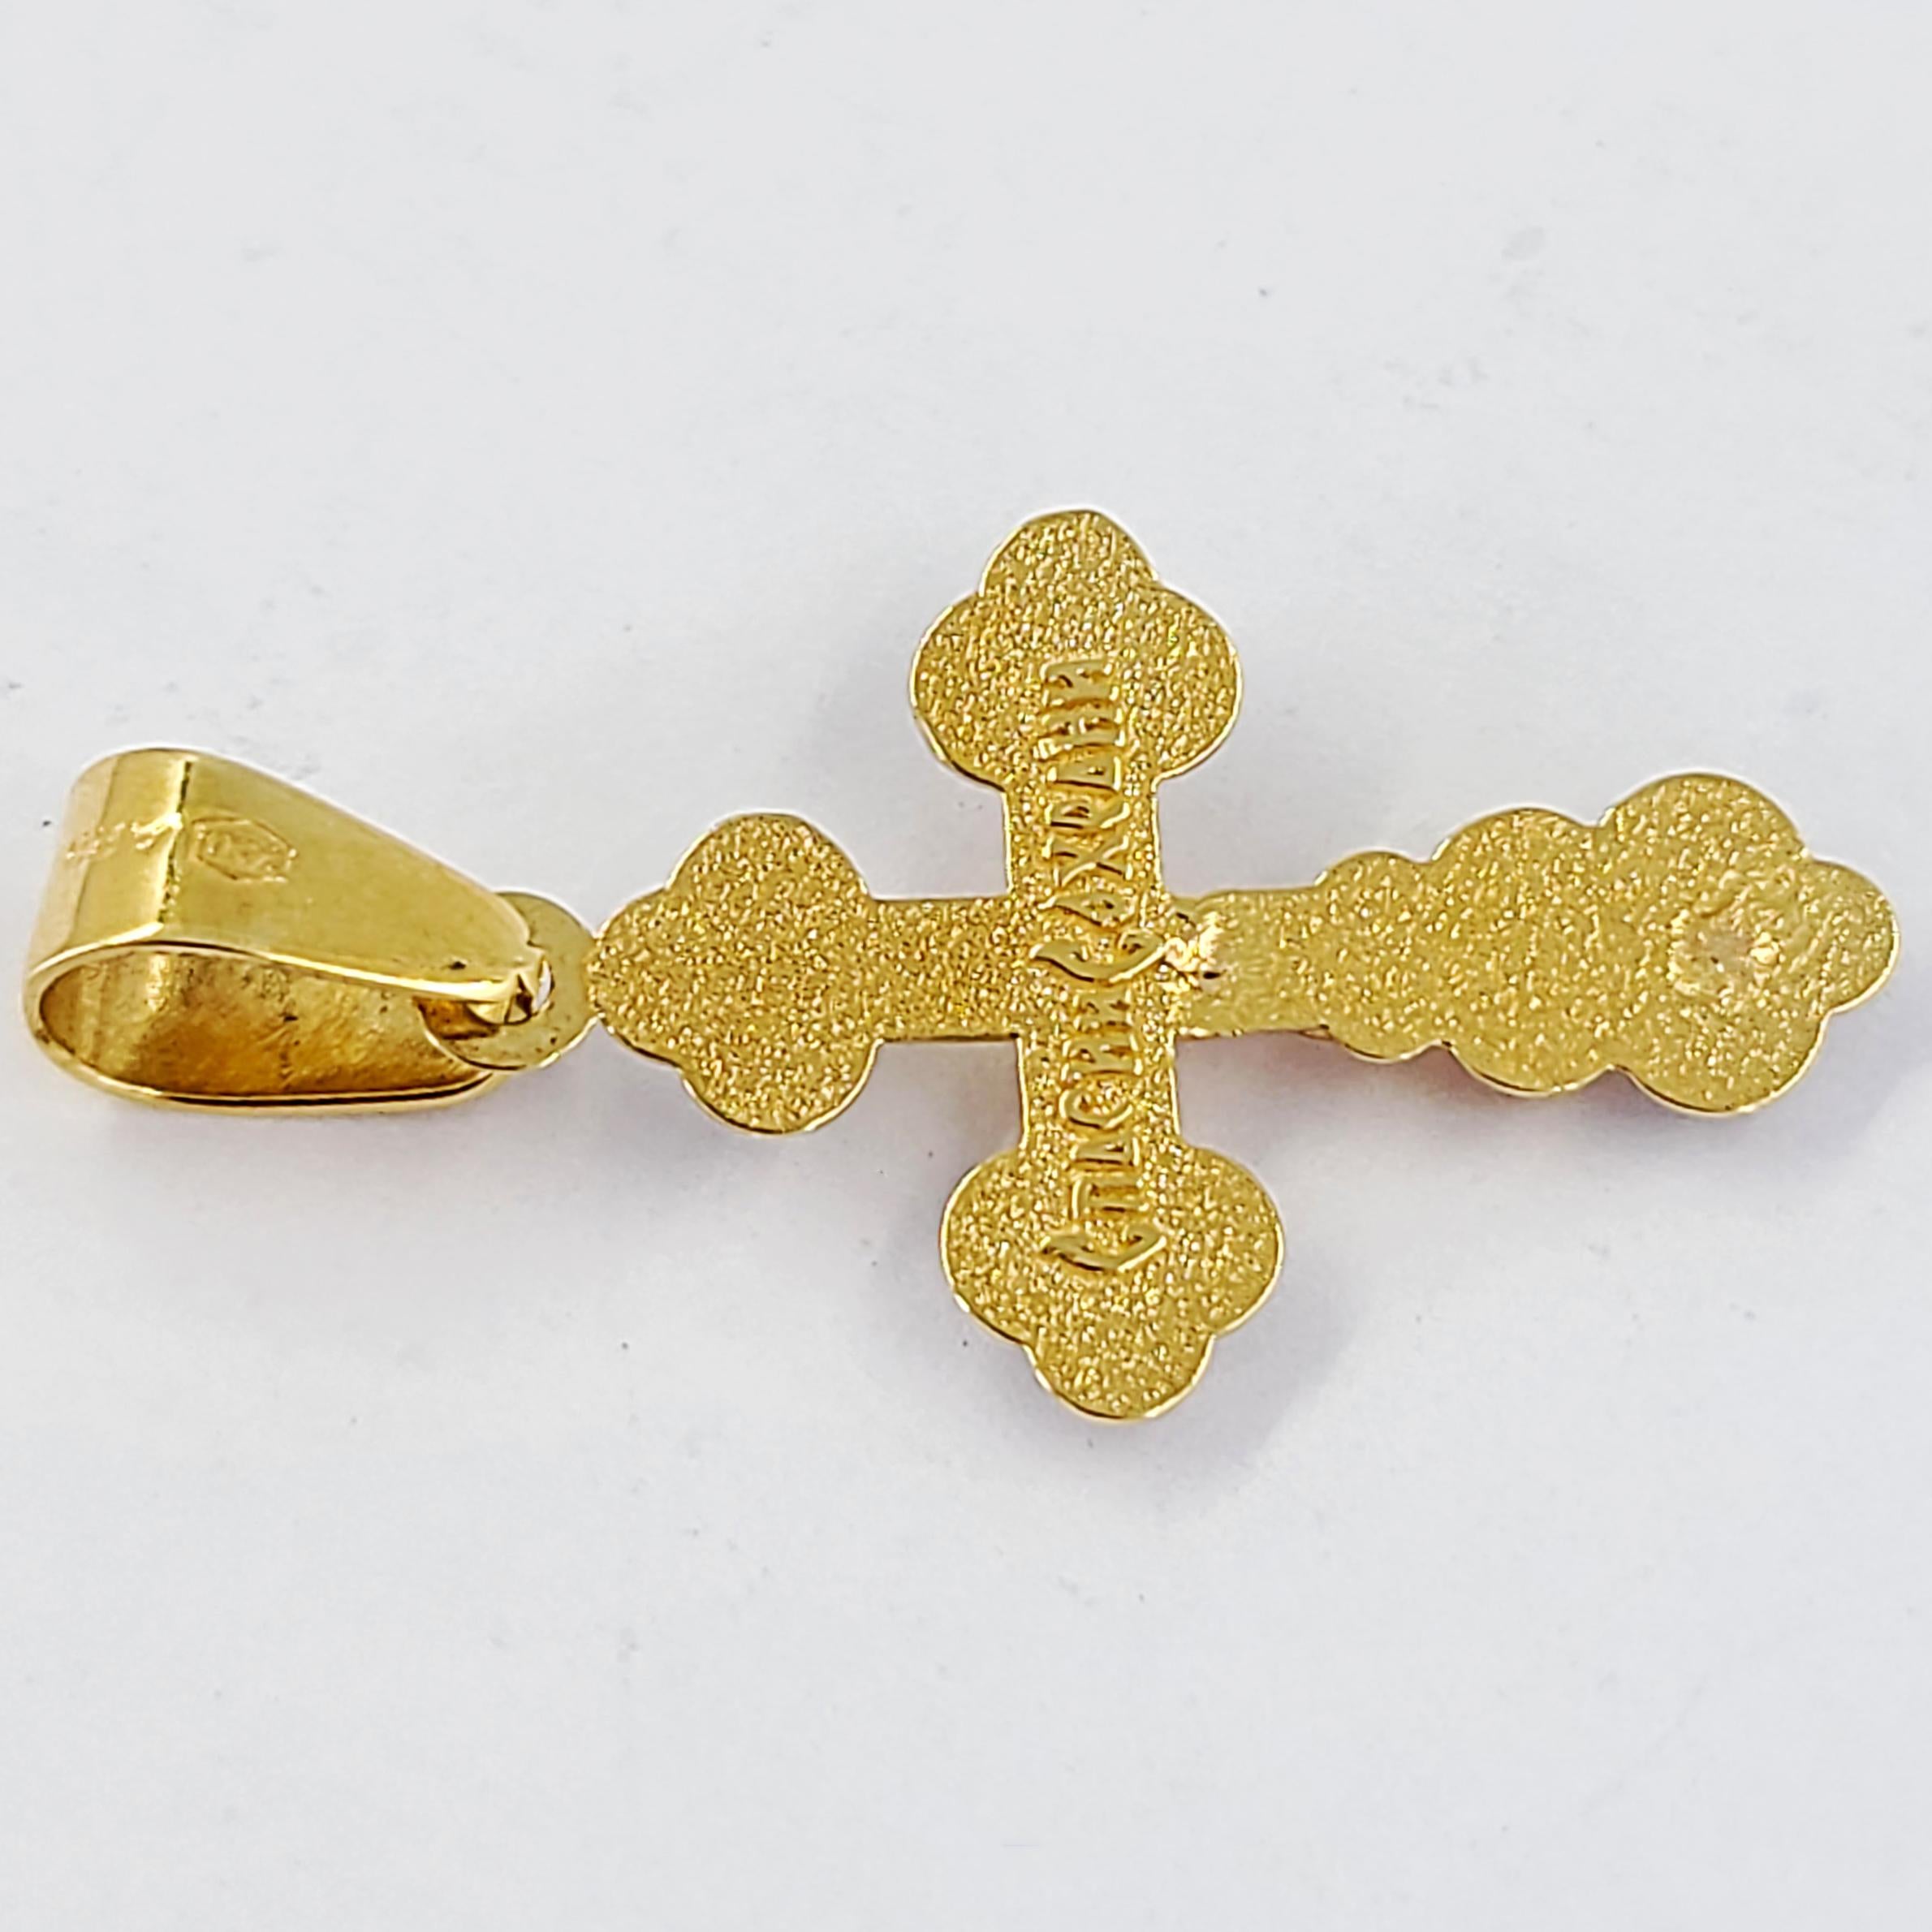 18 Karat Tricolor Gold Crucifix With Engraved Details. 1 Inch Long Including Bale. Finished Weight Is 1.4 Grams.